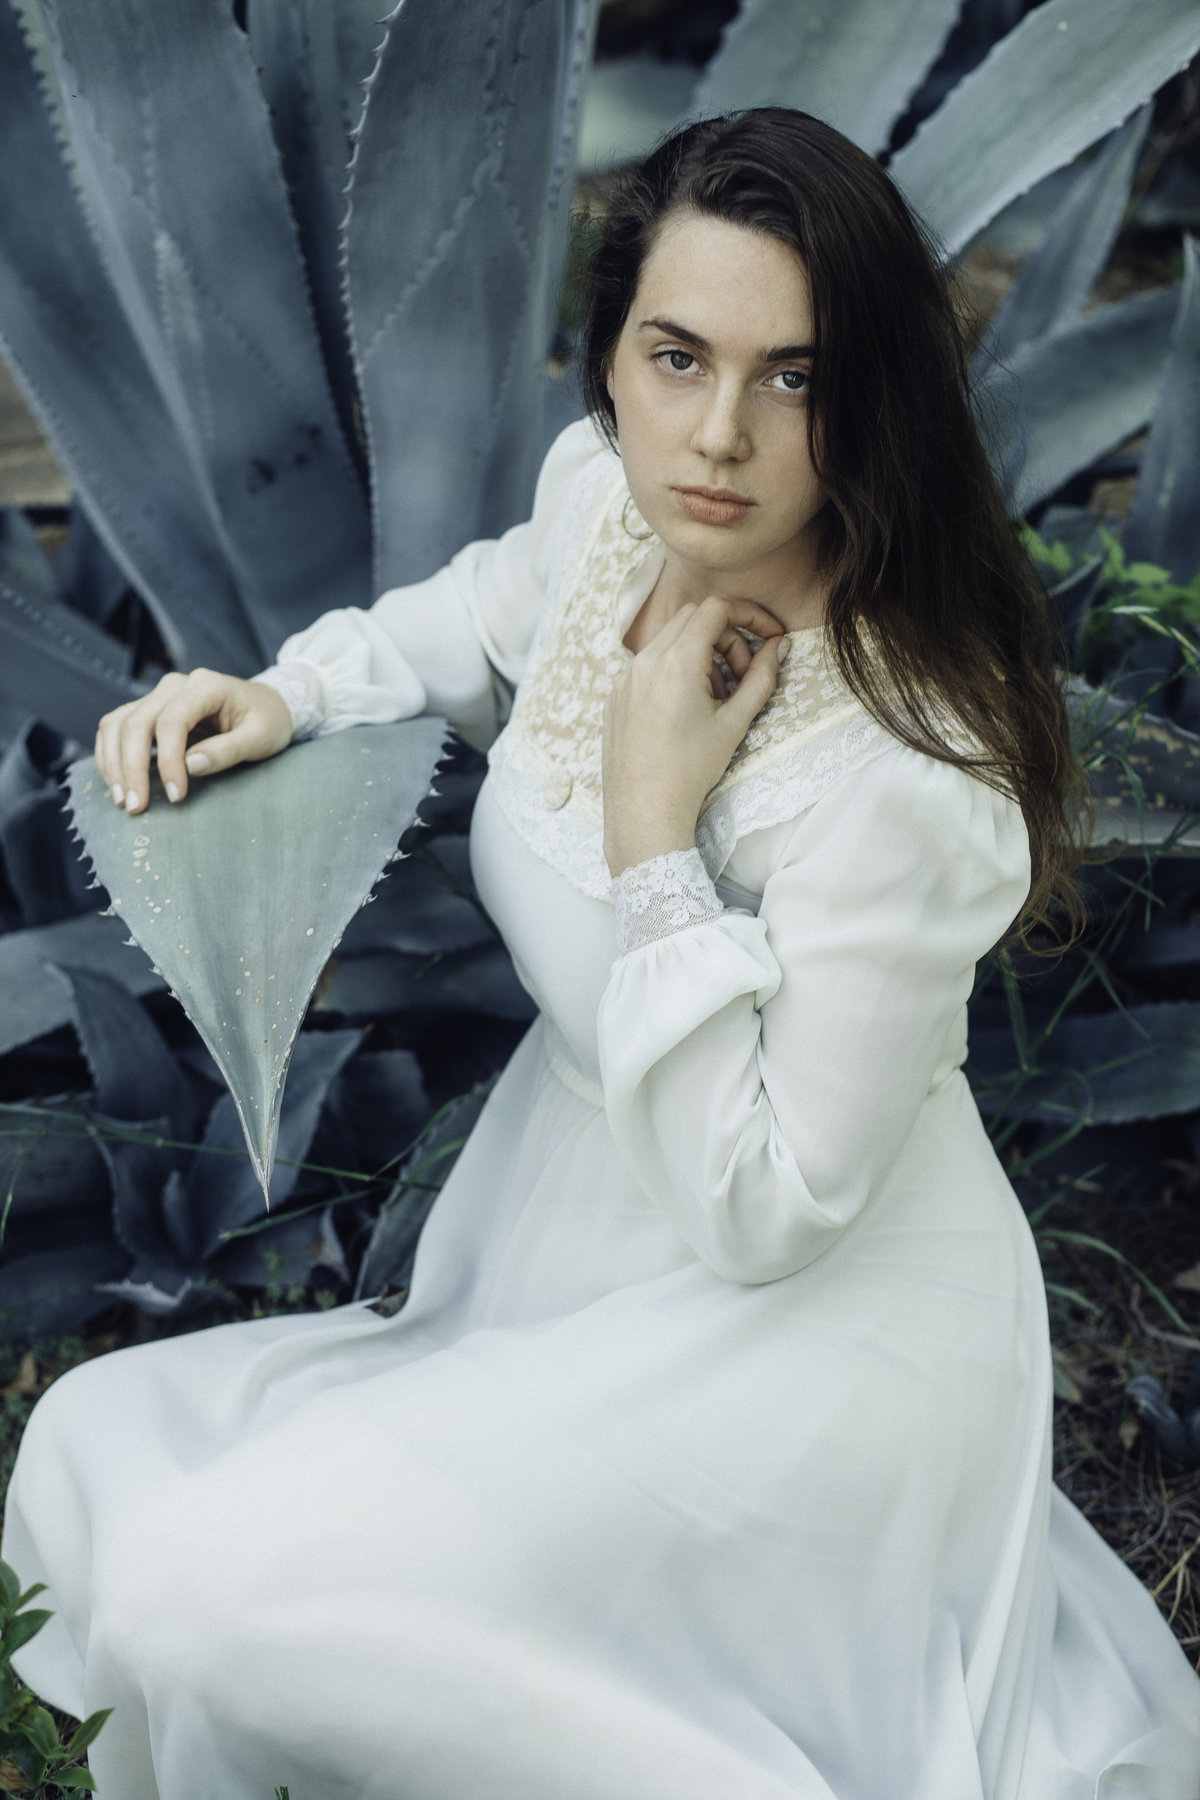 Portrait Photo Of Young Woman In White Dress Holding Her Neck Los Angeles